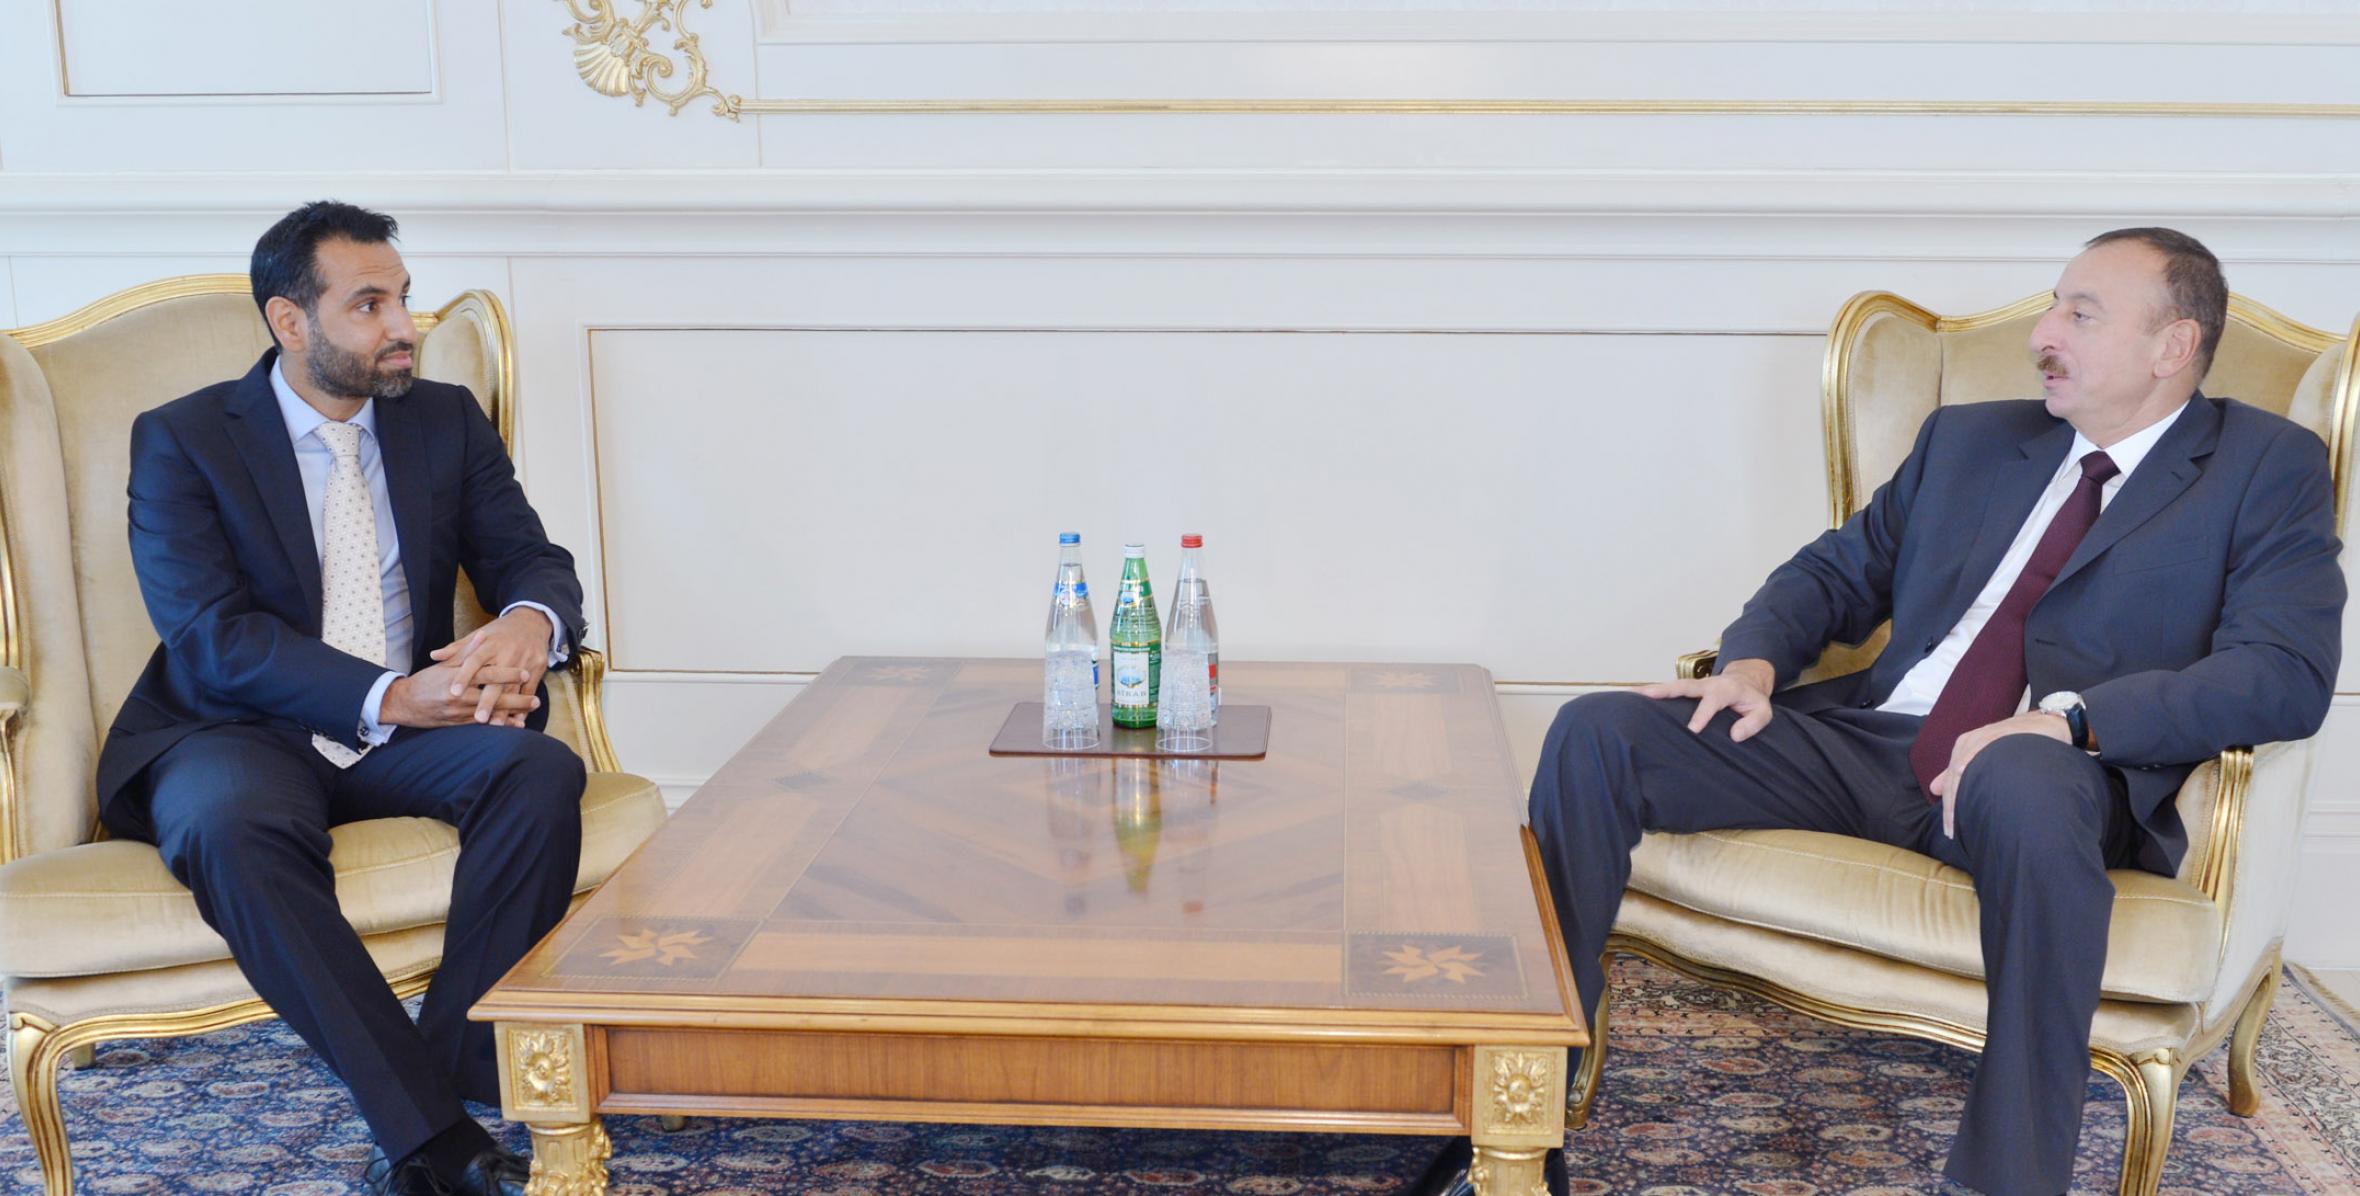 Ilham Aliyev accepted the credentials of the Ambassador of the United Kingdom of Great Britain and Northern Ireland to Azerbaijan